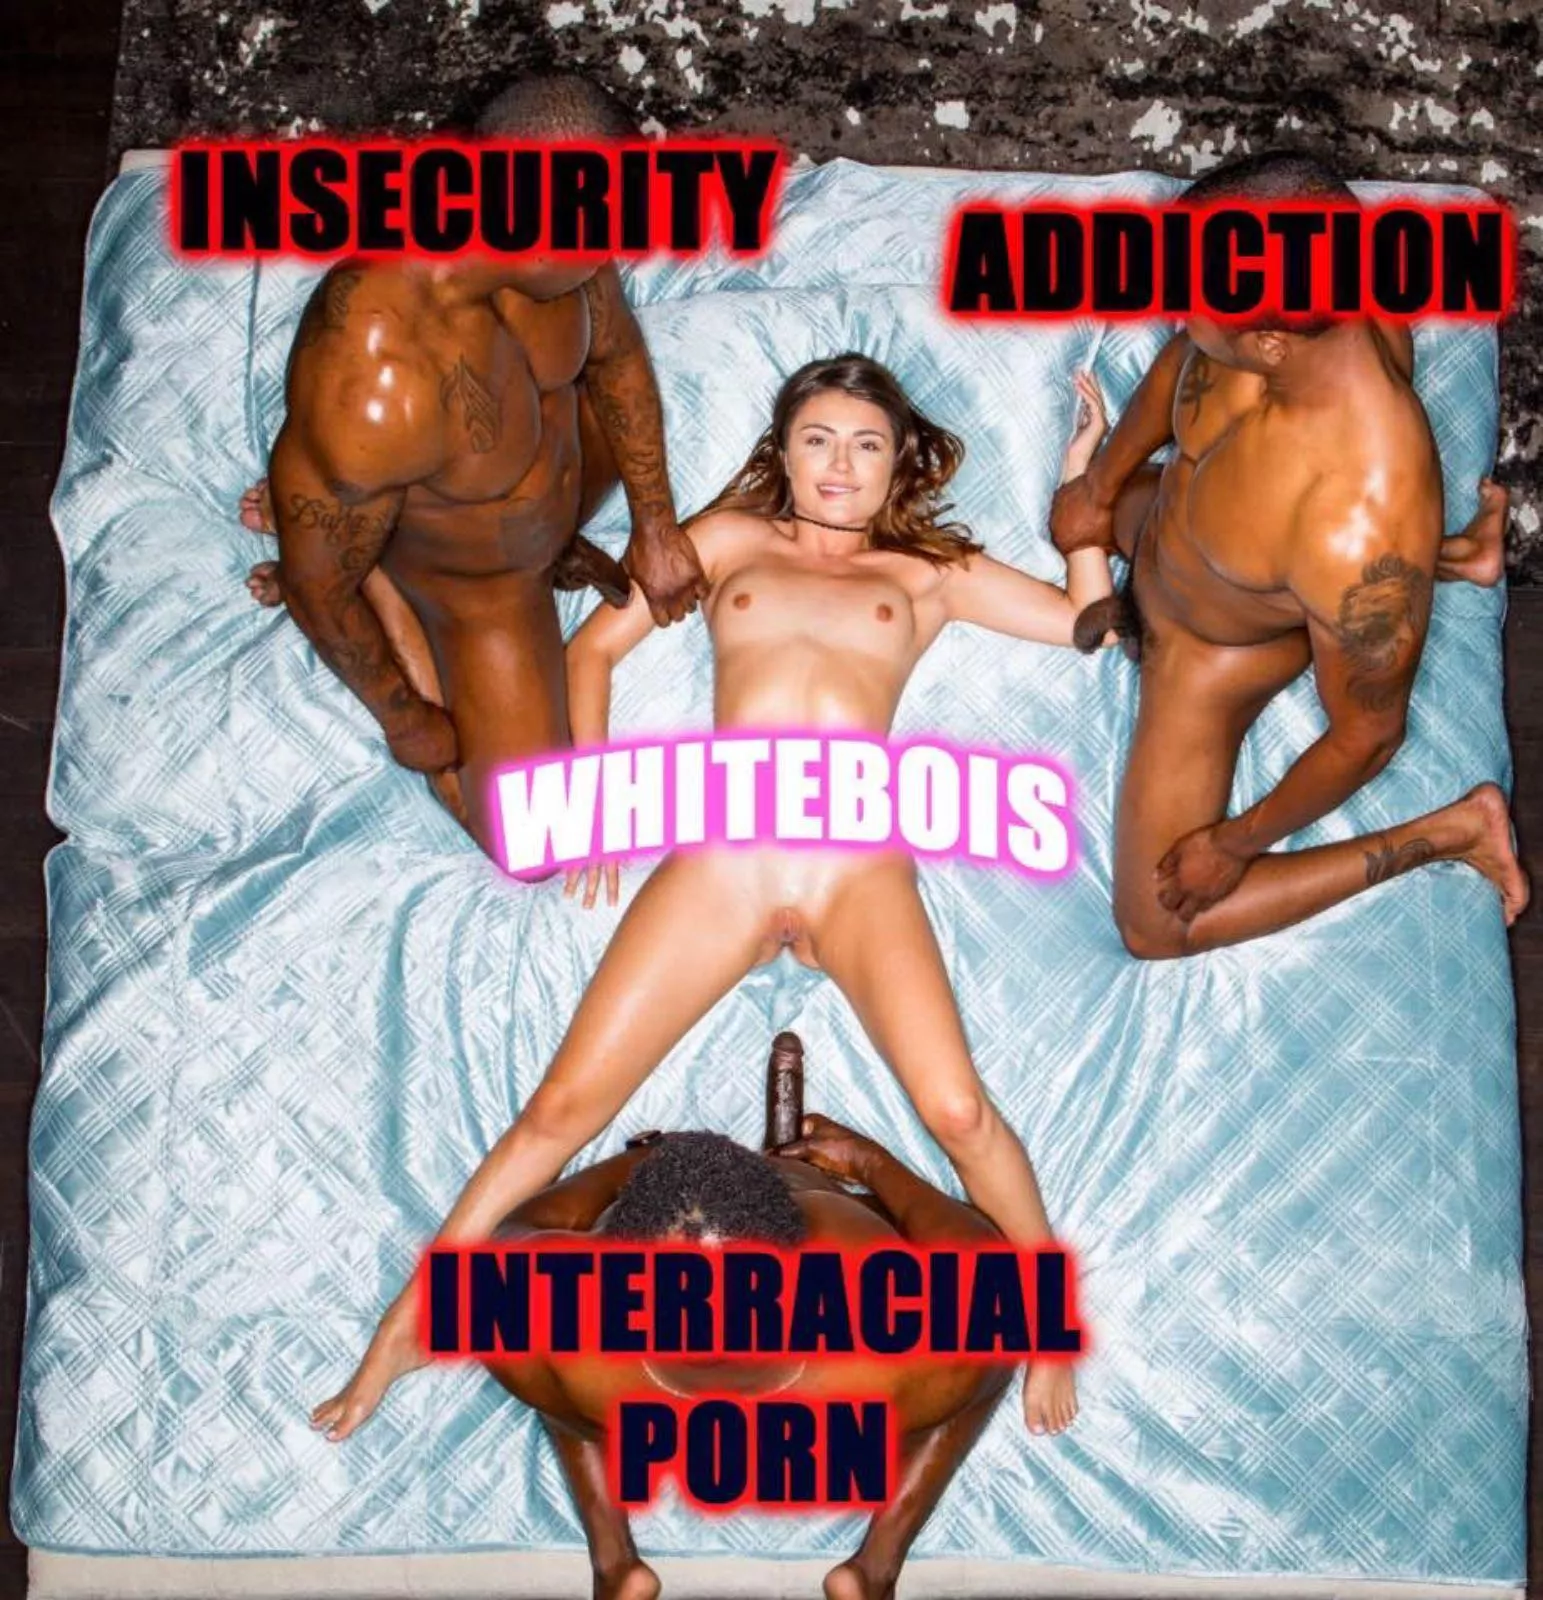 Interracial Virgin Gallery - I used to be a borderline white nationalist, now I'm an 19 year old virgin  who can only cum to BBCâ€¦ What happened? Kik: nuxyses nudes |  GLAMOURHOUND.COM